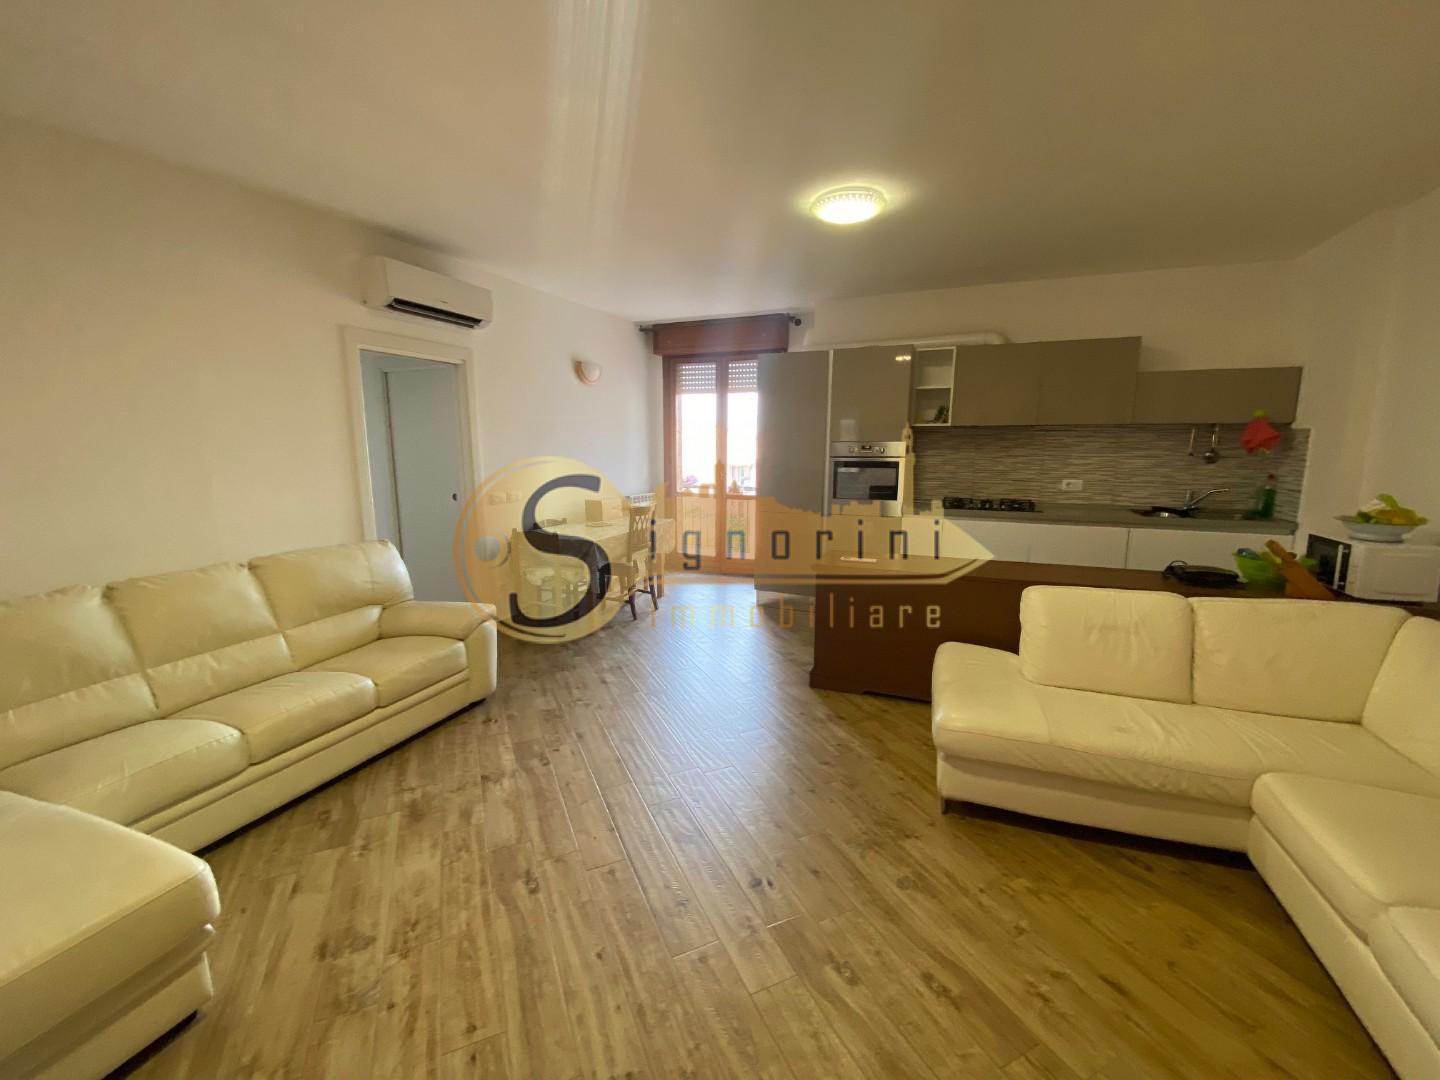 Apartment for sale in Sovicille (SI)